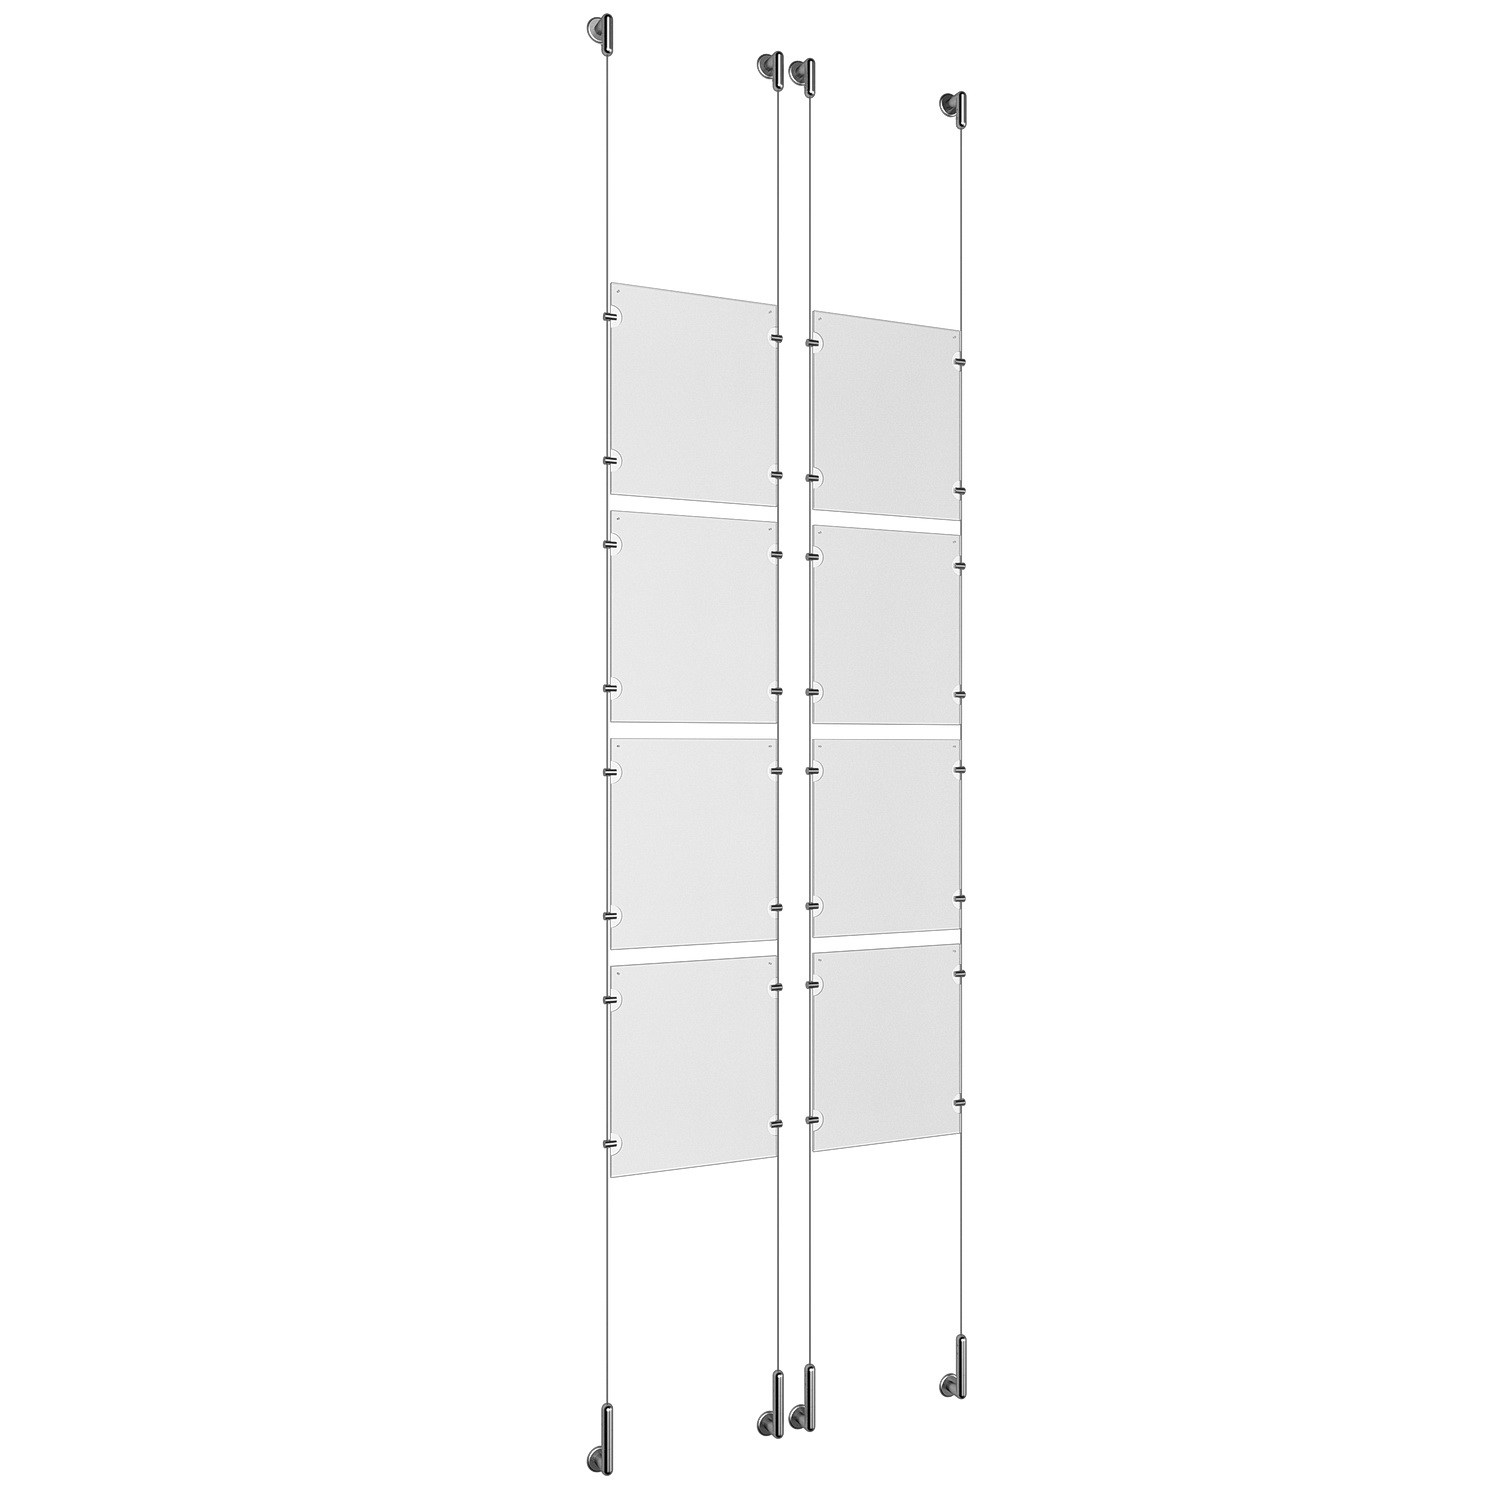 (8) 8-1/2'' Width x 11'' Height Clear Acrylic Frame & (4) Wall-to-Wall Stainless Steel Satin Brushed Cable Systems with (32) Single-Sided Panel Grippers